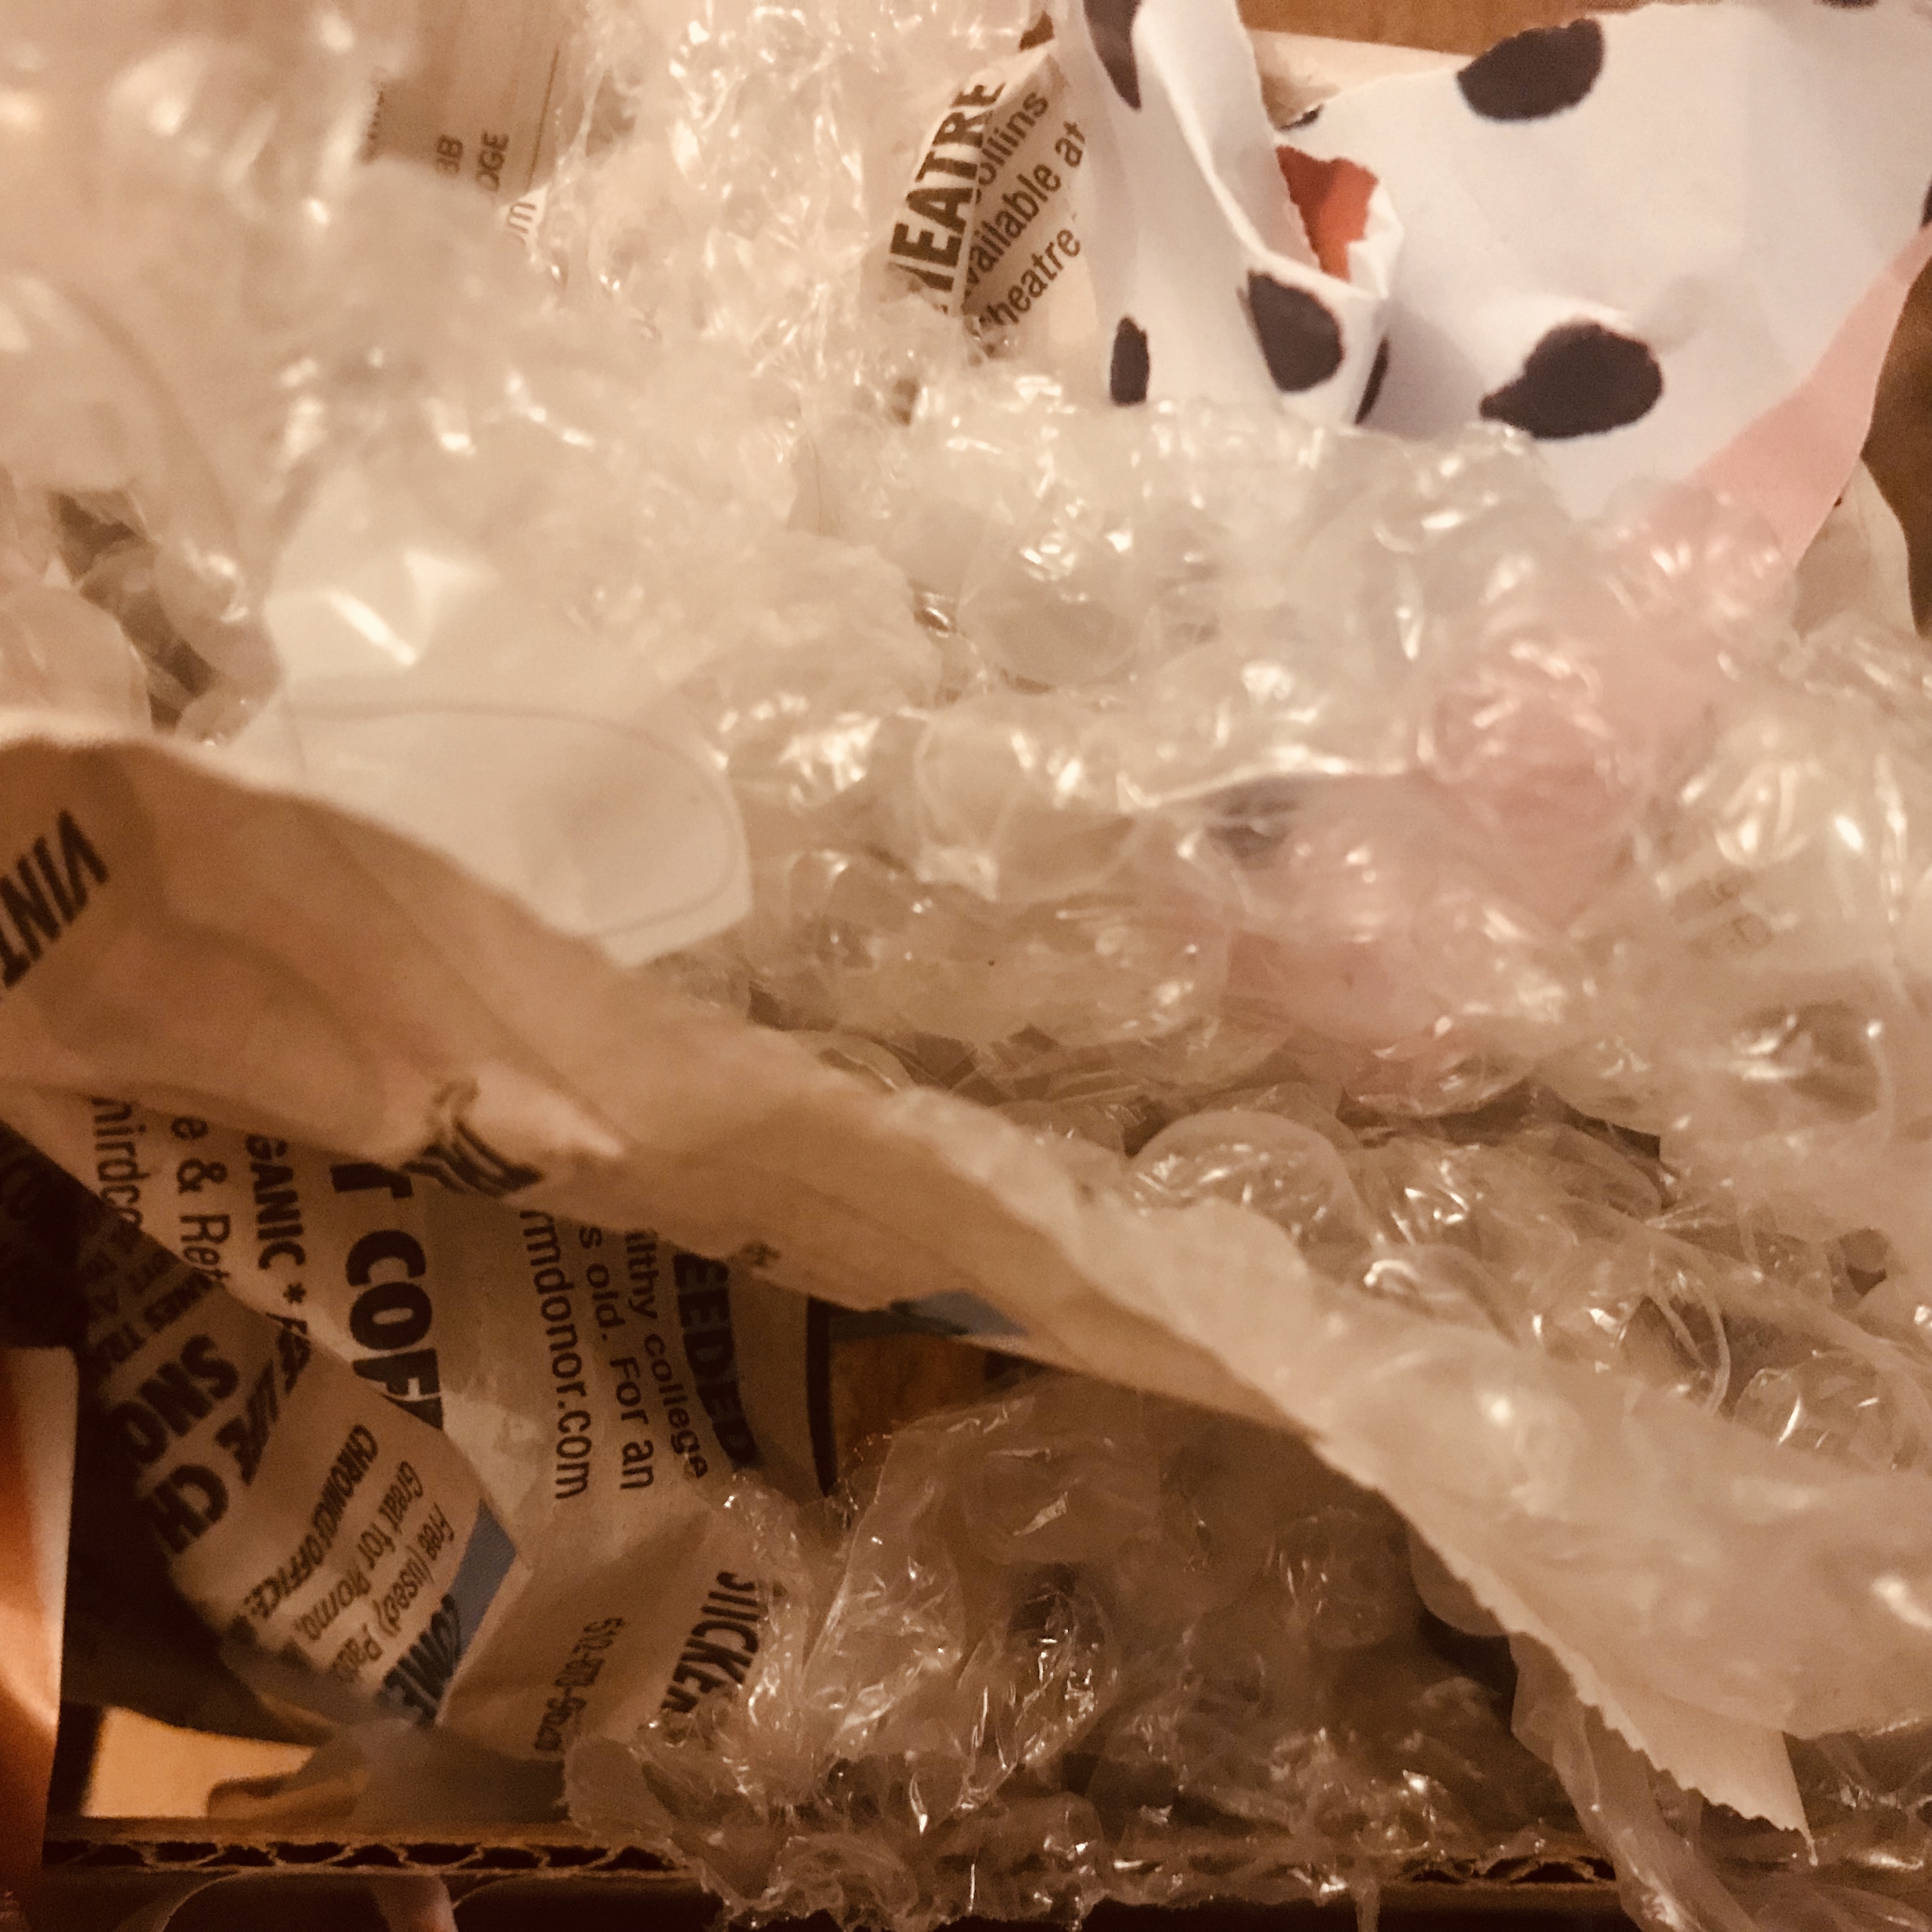 (No text on this image--just bubble wrap, newspaper, and cardboard.)